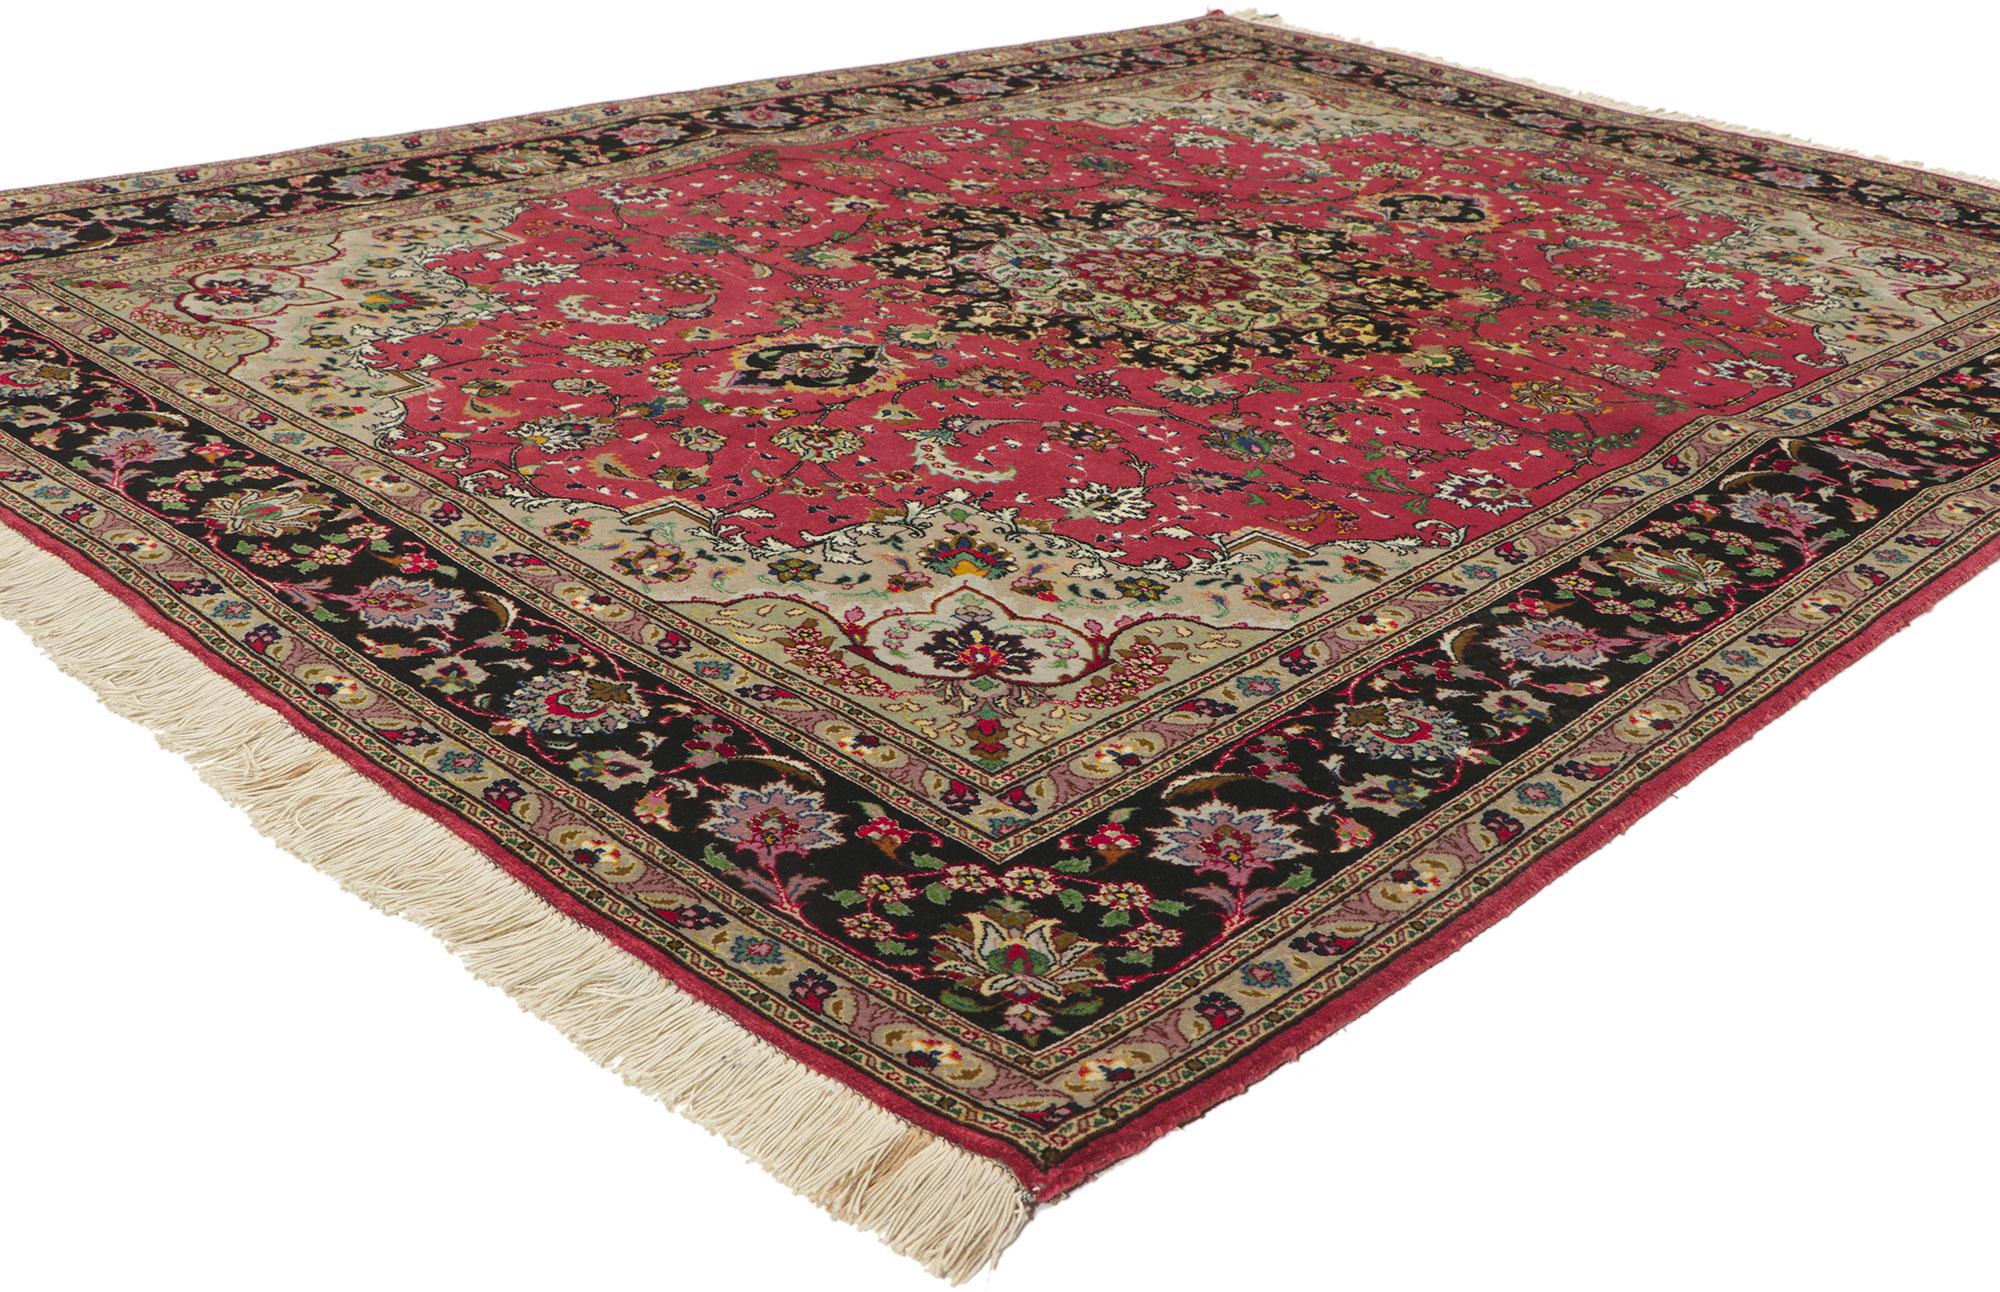 74399 Vintage Persian Silk Tabriz Rug, 04'11 X 06'06. 
From casual elegance to fresh and formal, this hand-knotted silk vintage Persian Tabriz rug is poised to impress. Its bold colors evoke an air of warmth and comfort with a timeless design